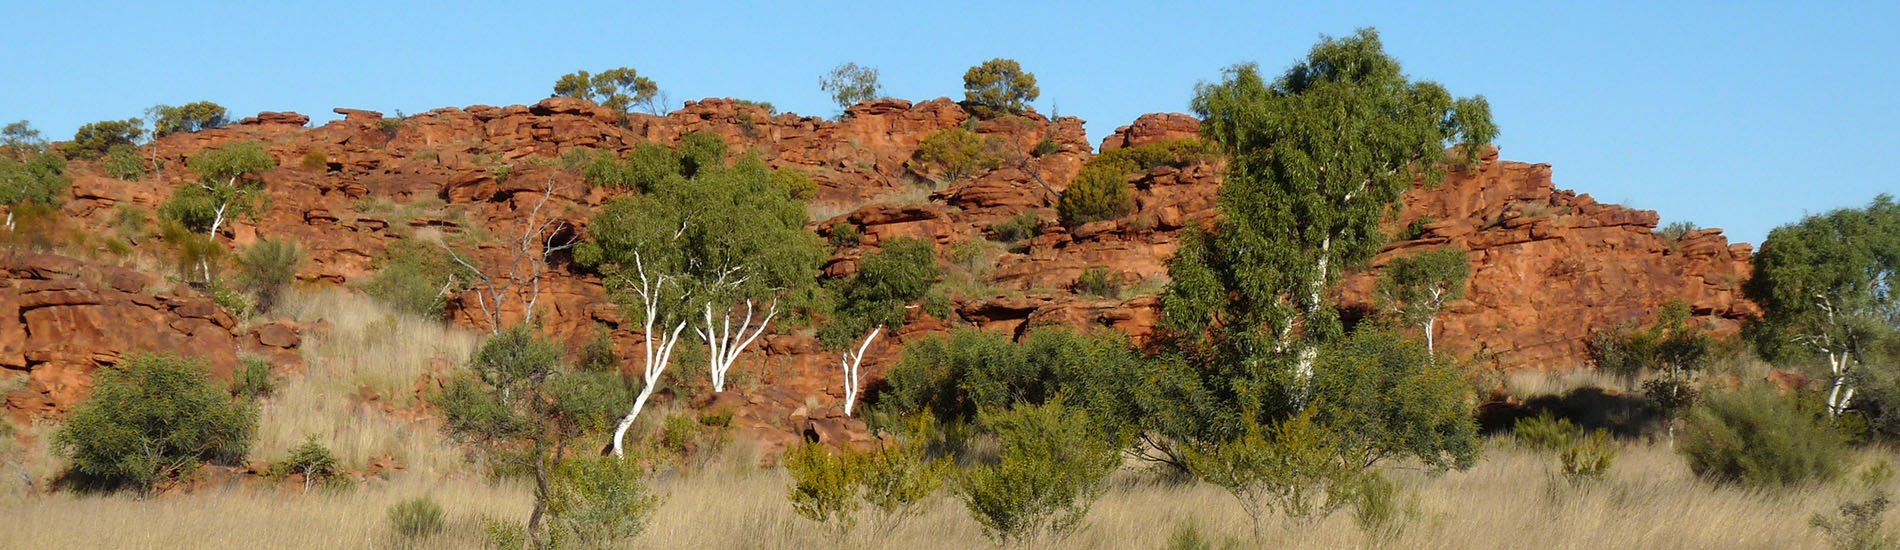 Giant termite mound in foreground of spinifex plain